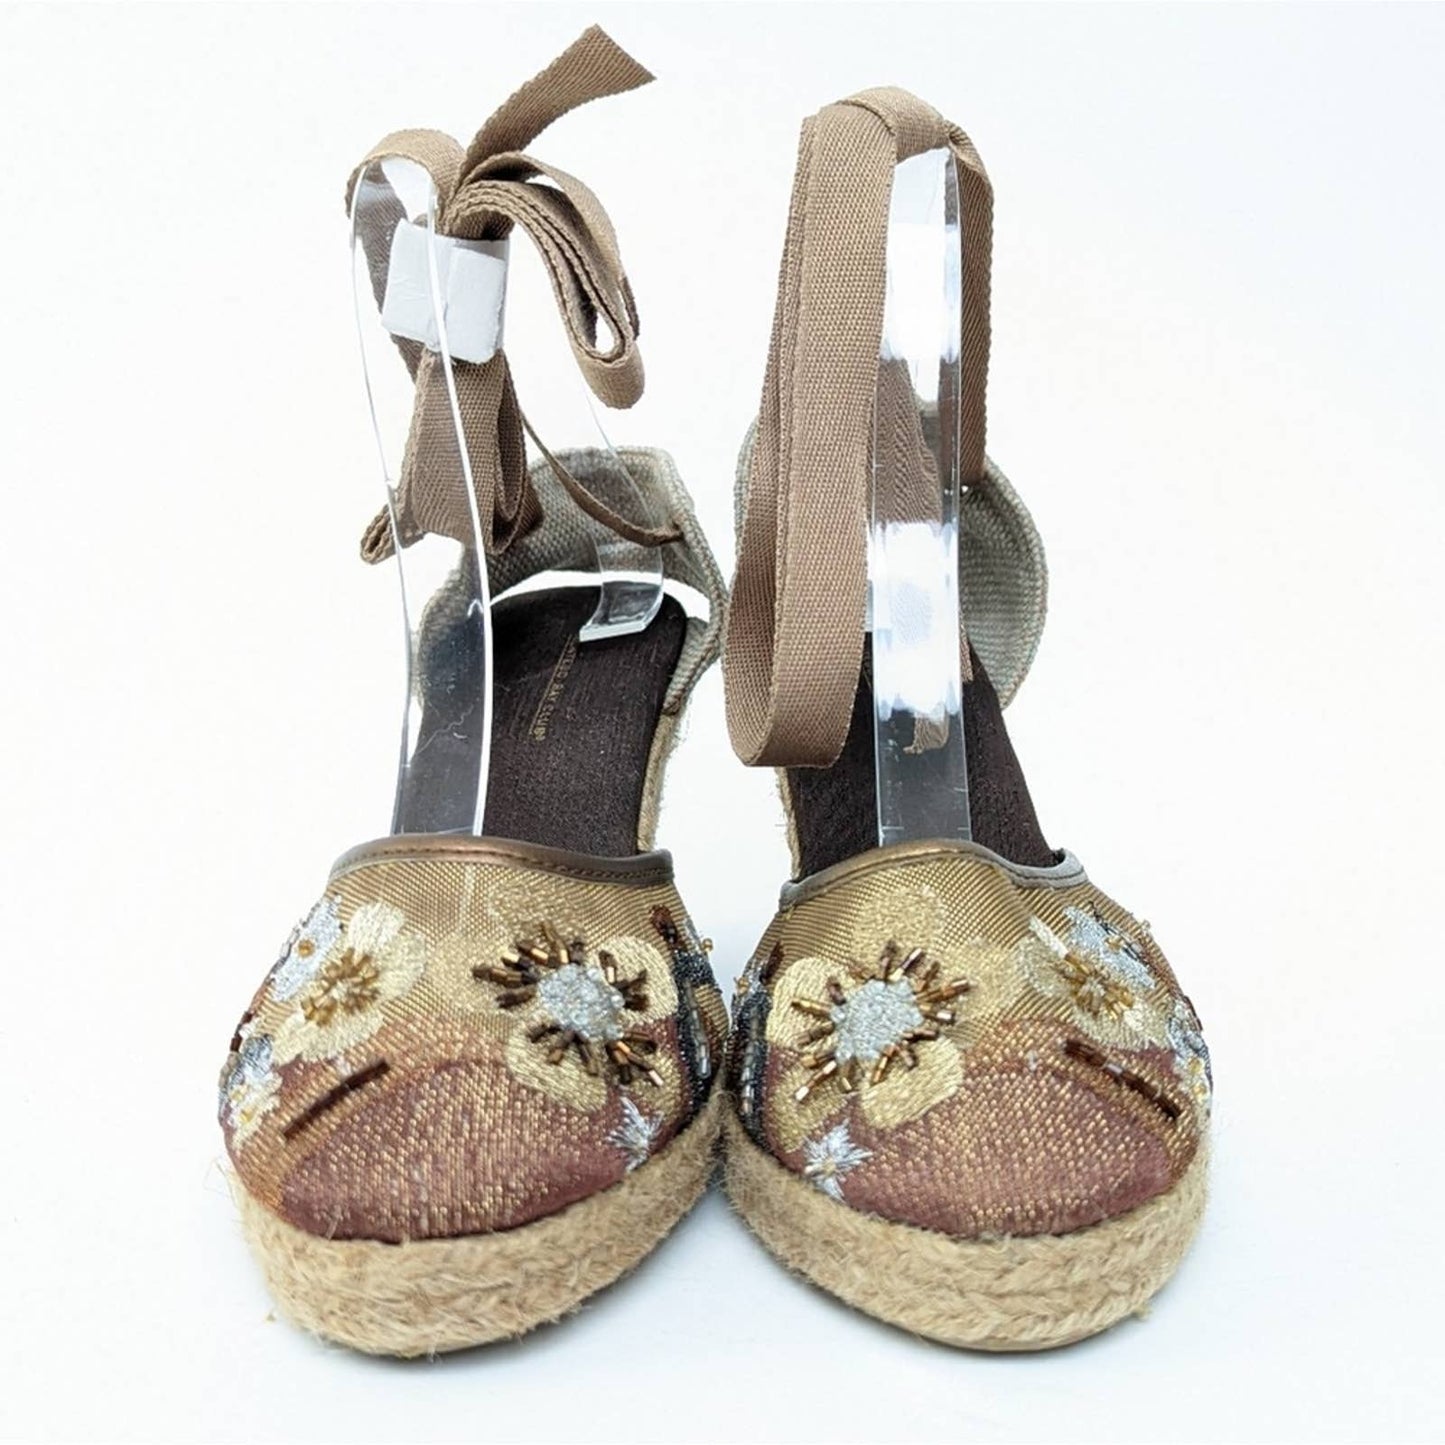 NEW MONTEGO BAY CLUB Embroidered  Floral Espadrille Wedge Sandals - 8